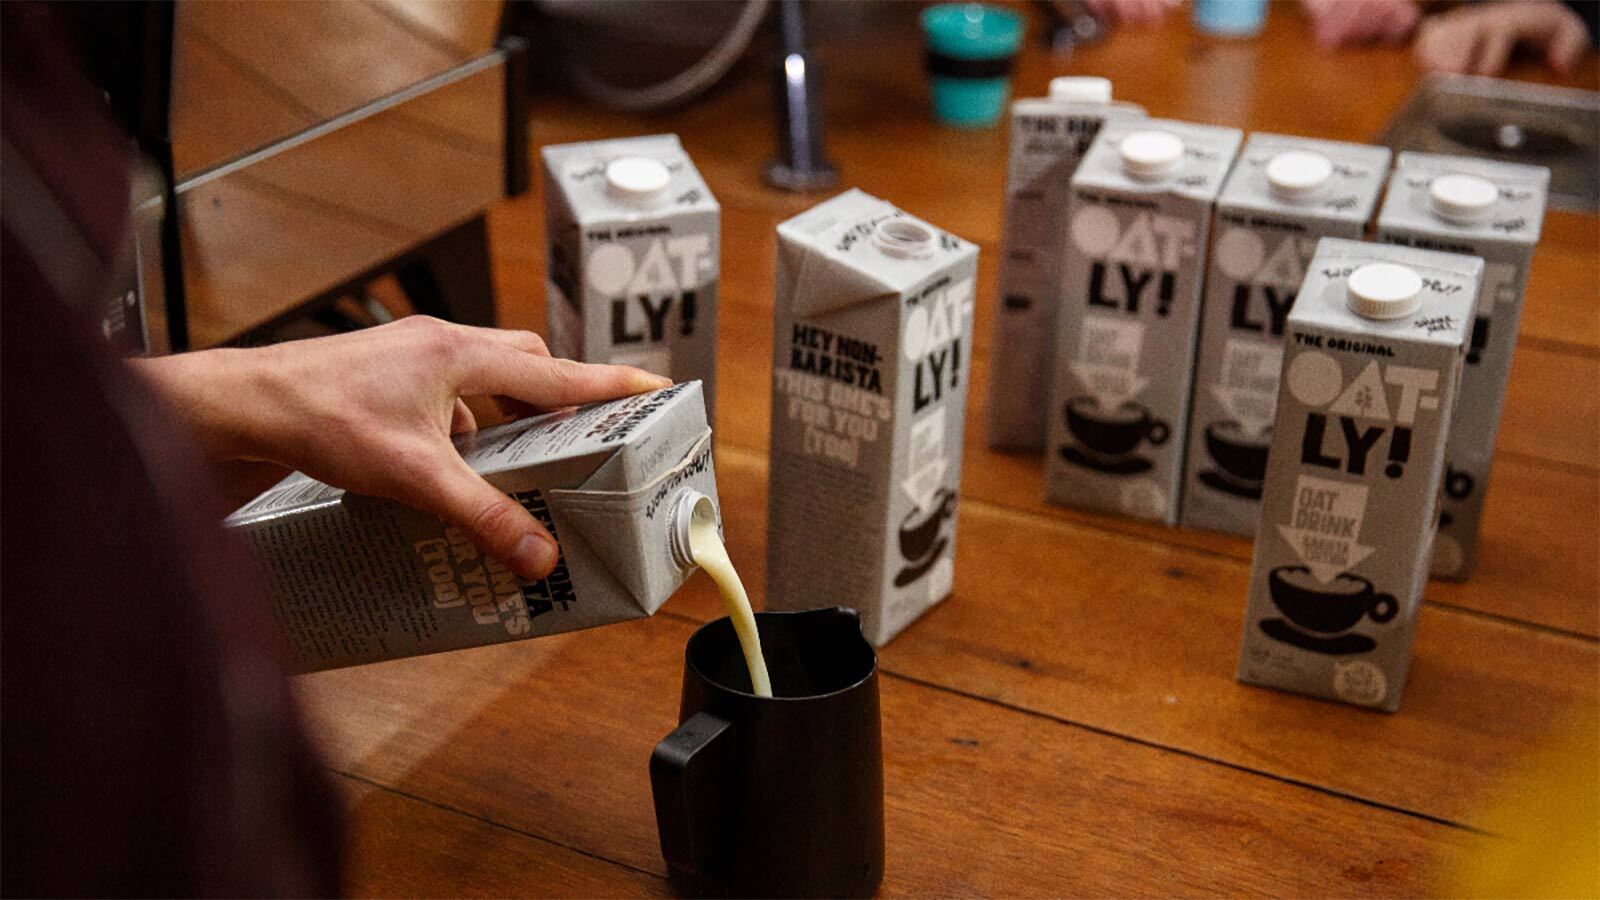 Oatly is seeking to trademark the term 'barista' and is urging Skinny Food Co. to stop using the term